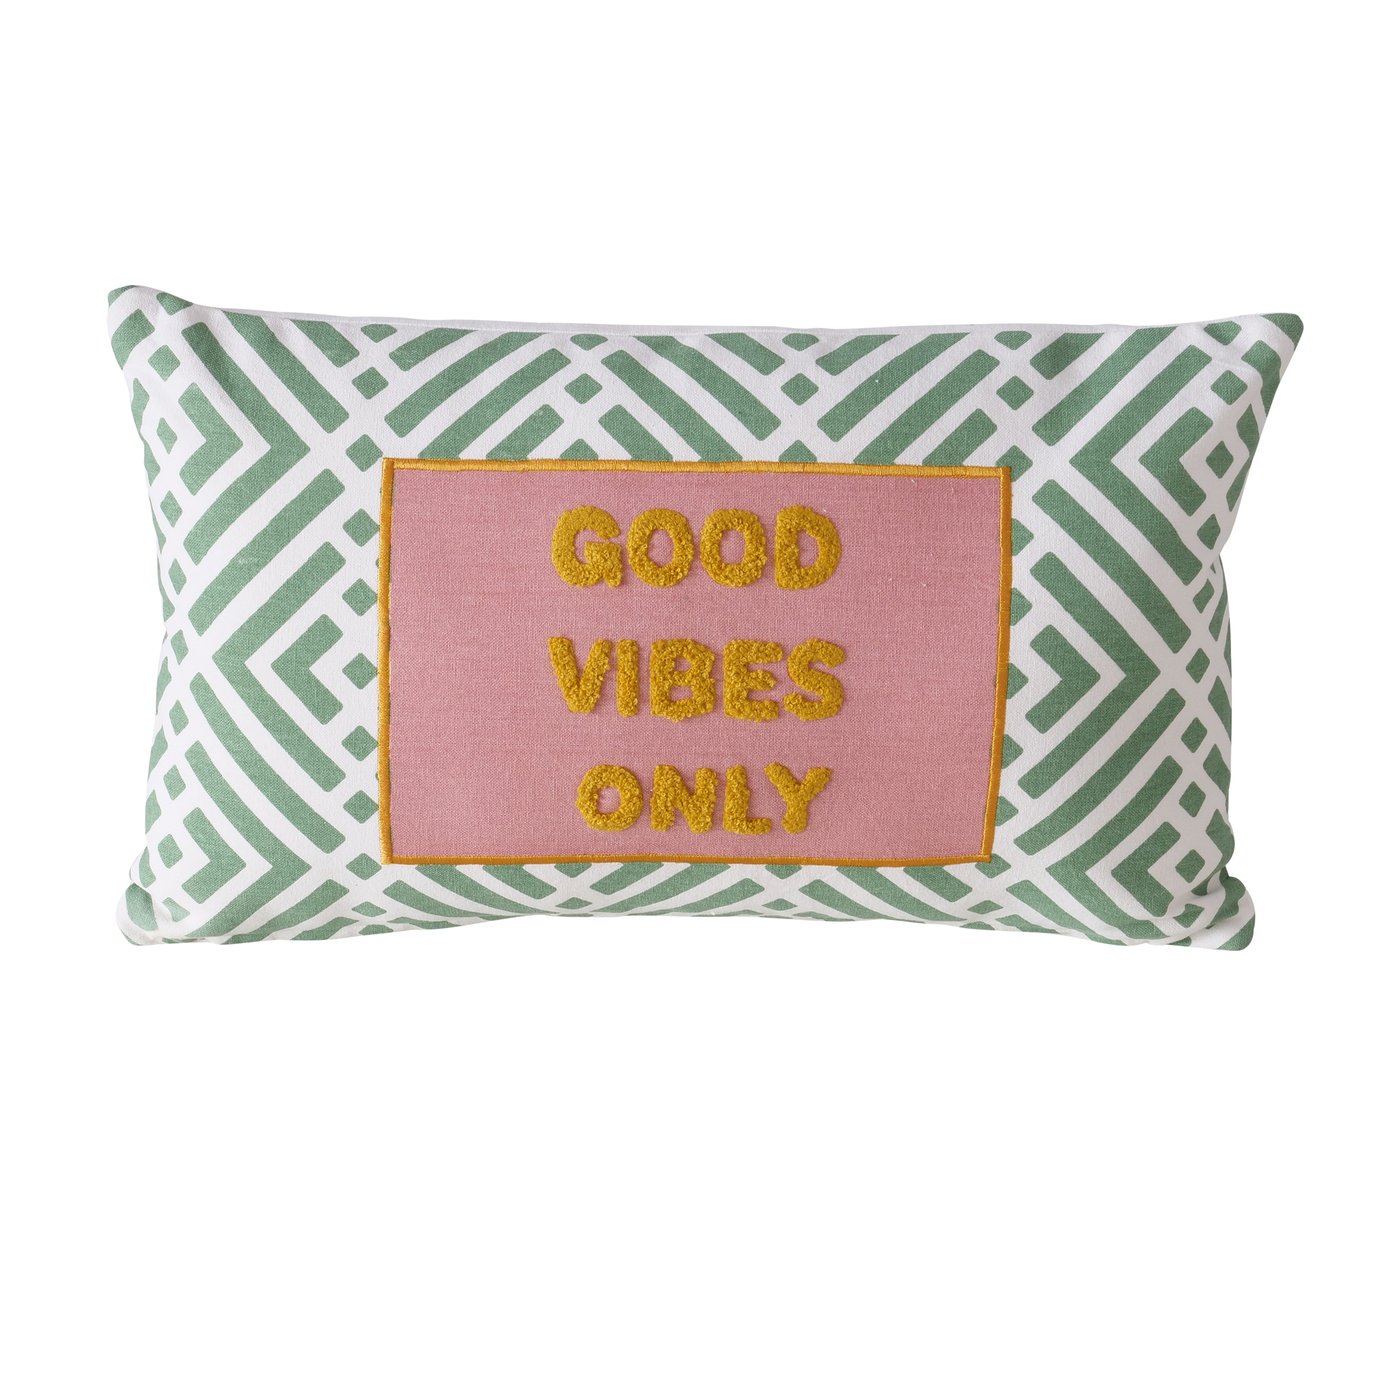 &Quirky Colour Pop Cushion : Good Vibes Only